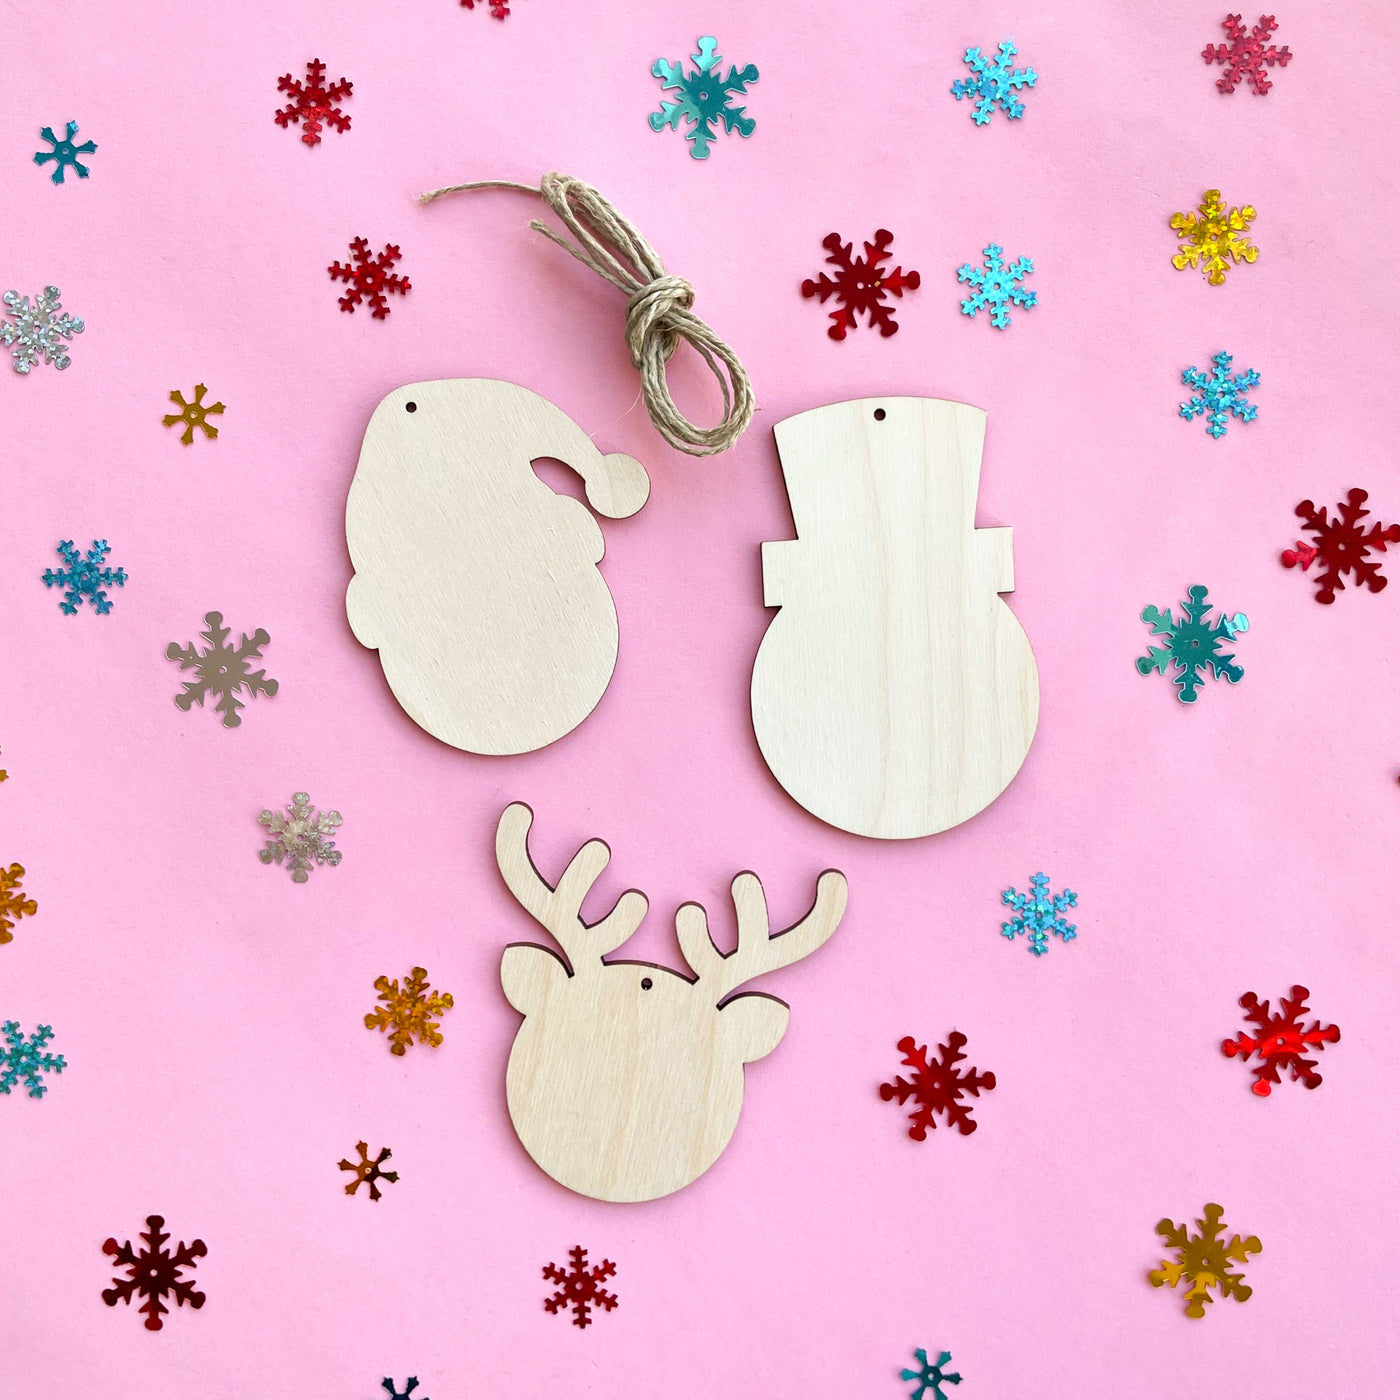 Unfinished wood ornaments for painting and craft projects with 3 classic characters: santa, a snowman, and a reindeer shape